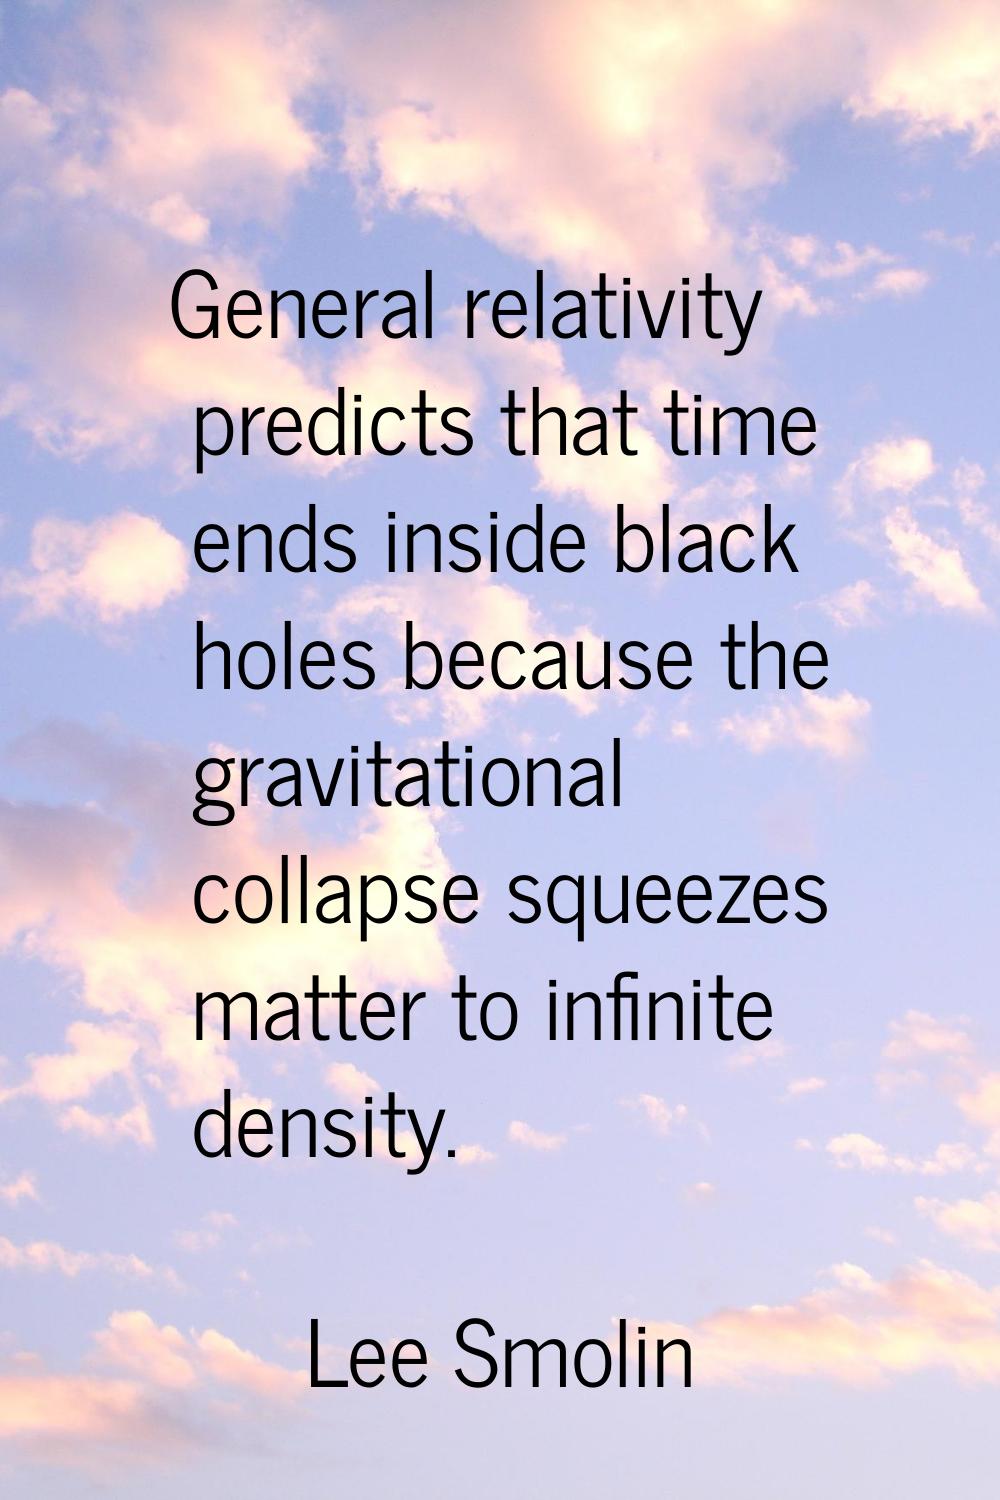 General relativity predicts that time ends inside black holes because the gravitational collapse sq